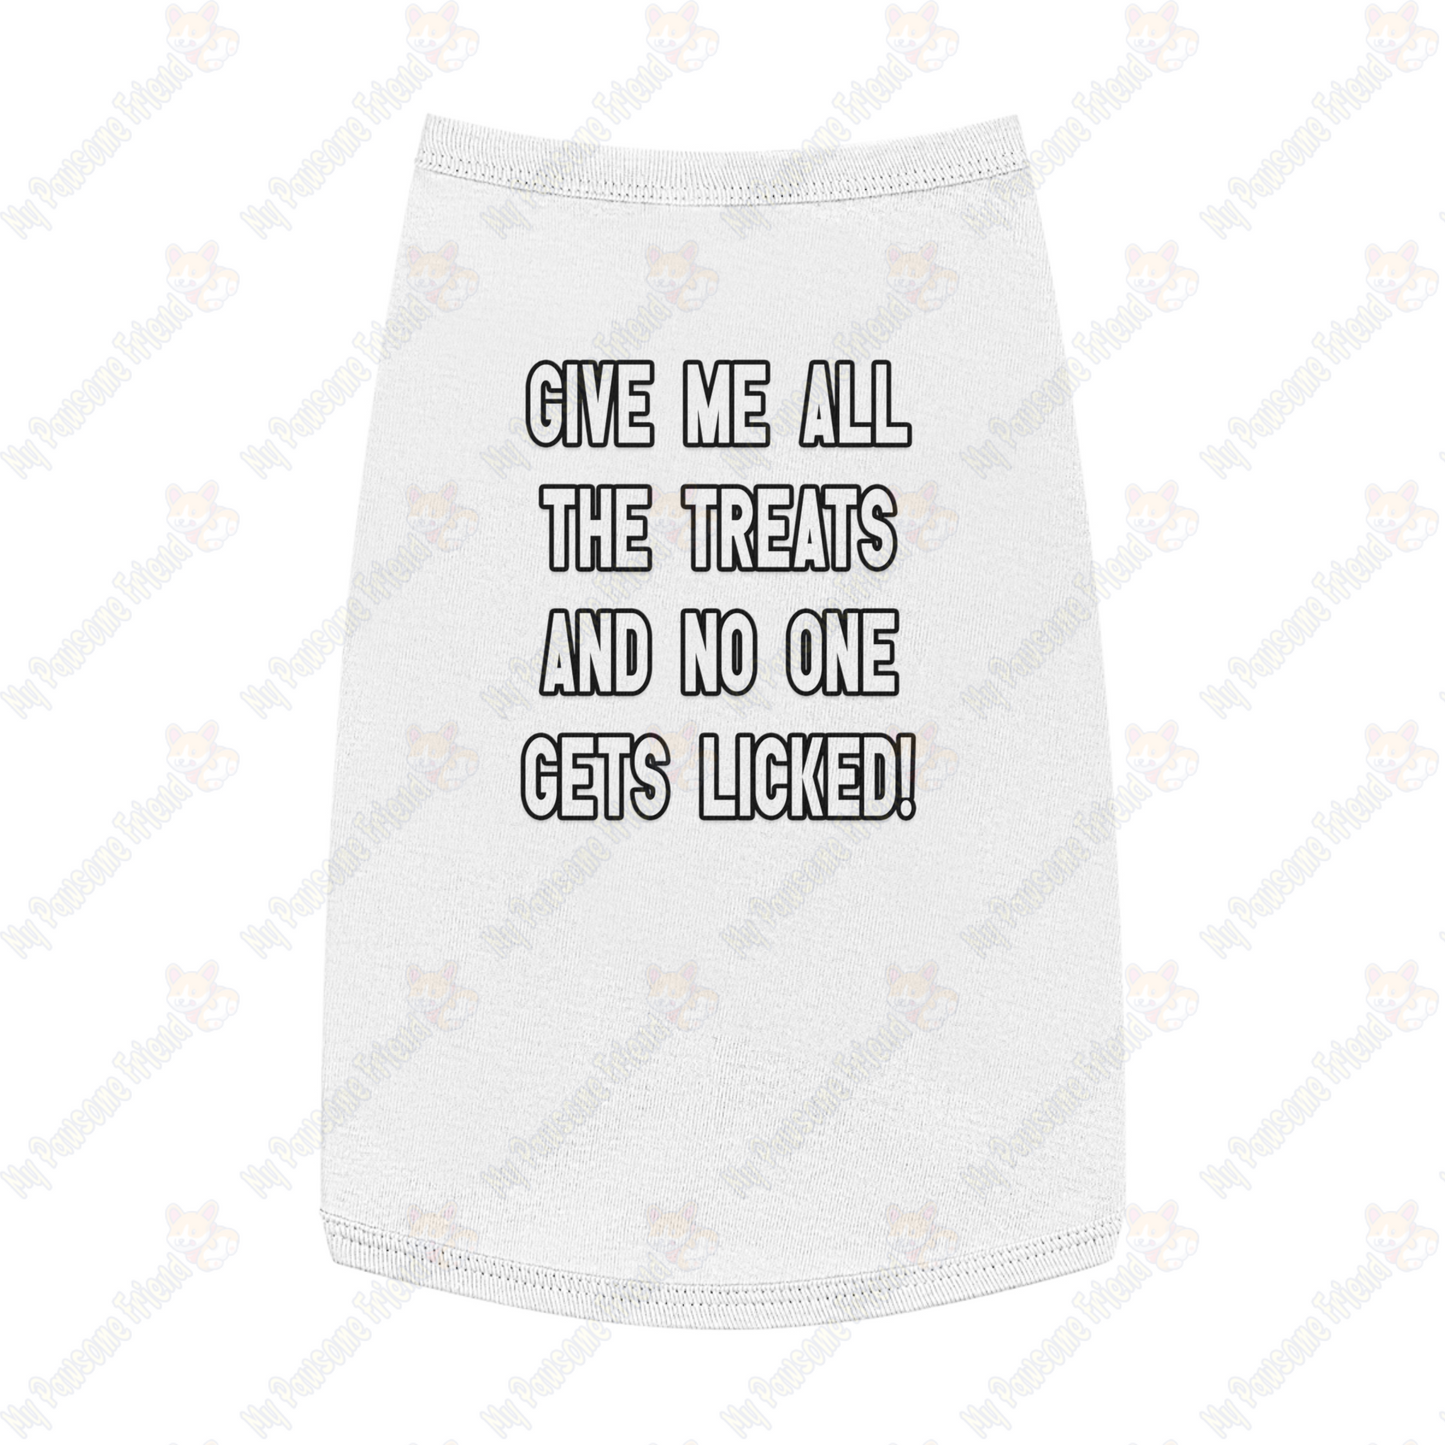 GIVE ME THE TREATS AND NO ONE GETS LICKED! Pet Tank Top white